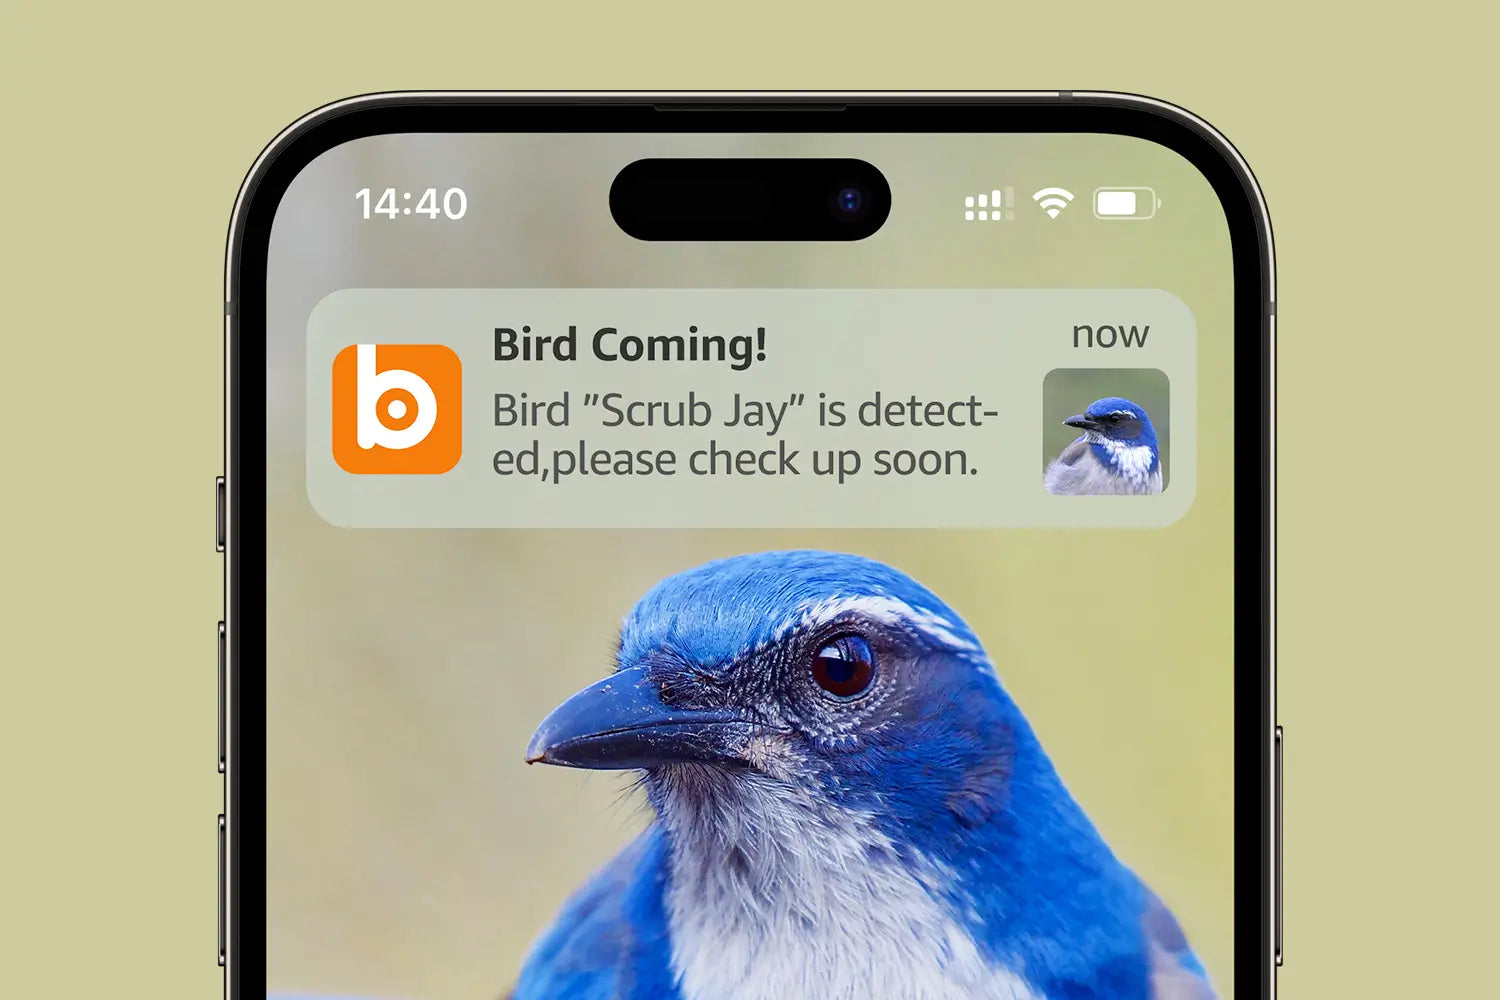 Receive timely notifications whenever birds visit, So you won't miss any birds that make you smile.